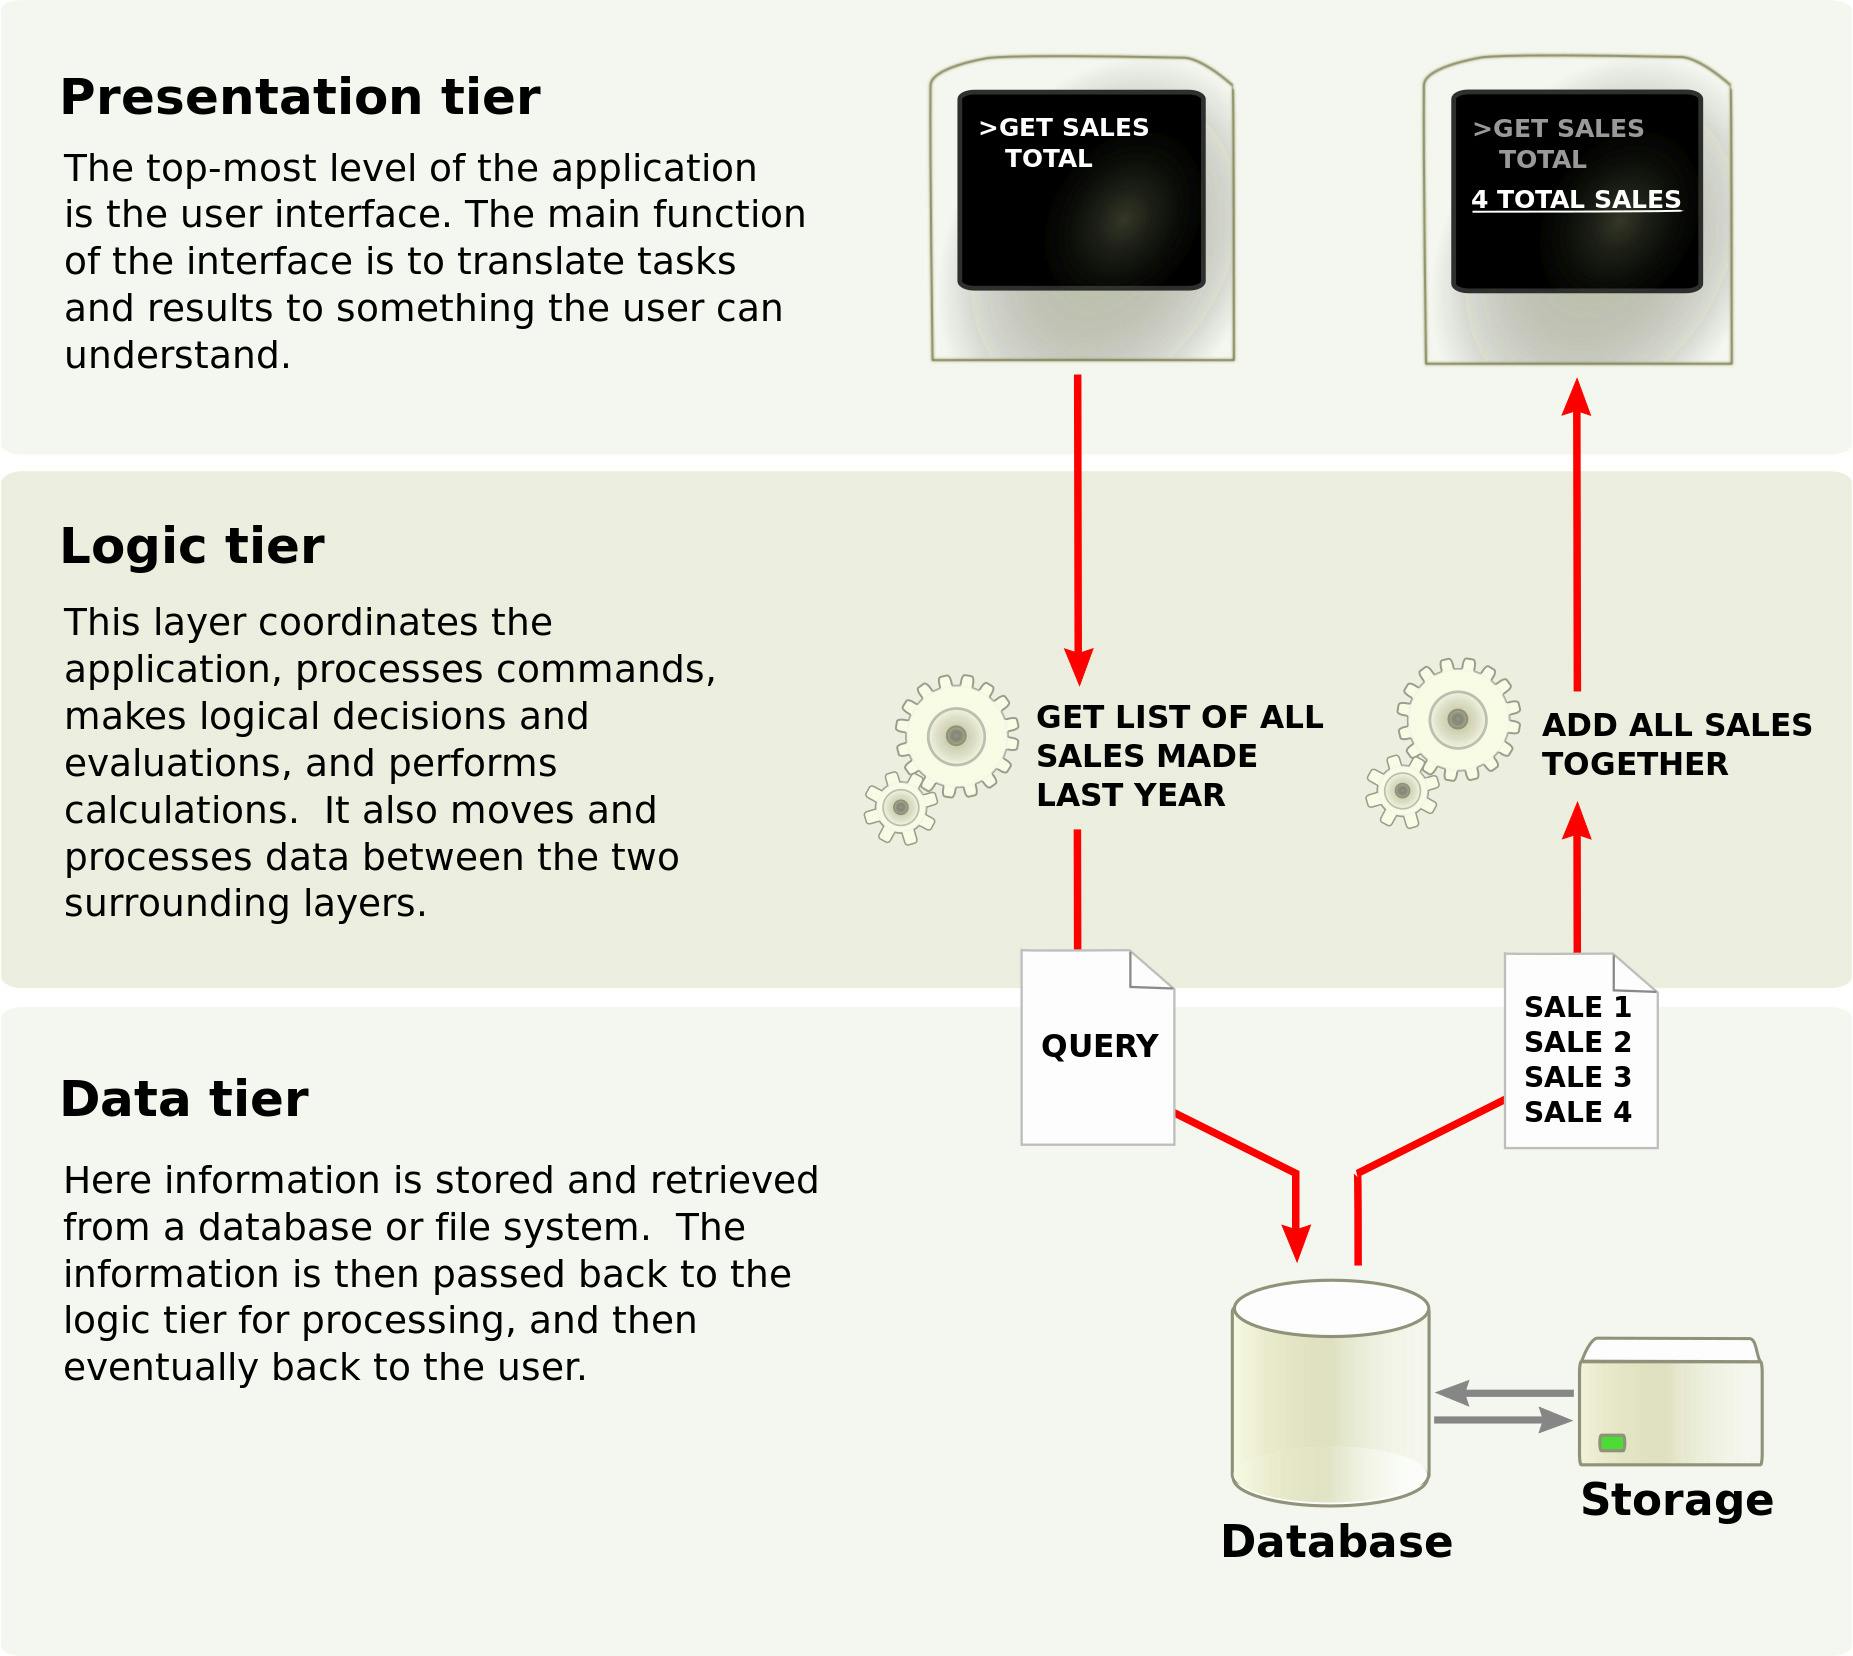 A diagram of a 3-tier application architecture, including presentation, logic, and data.